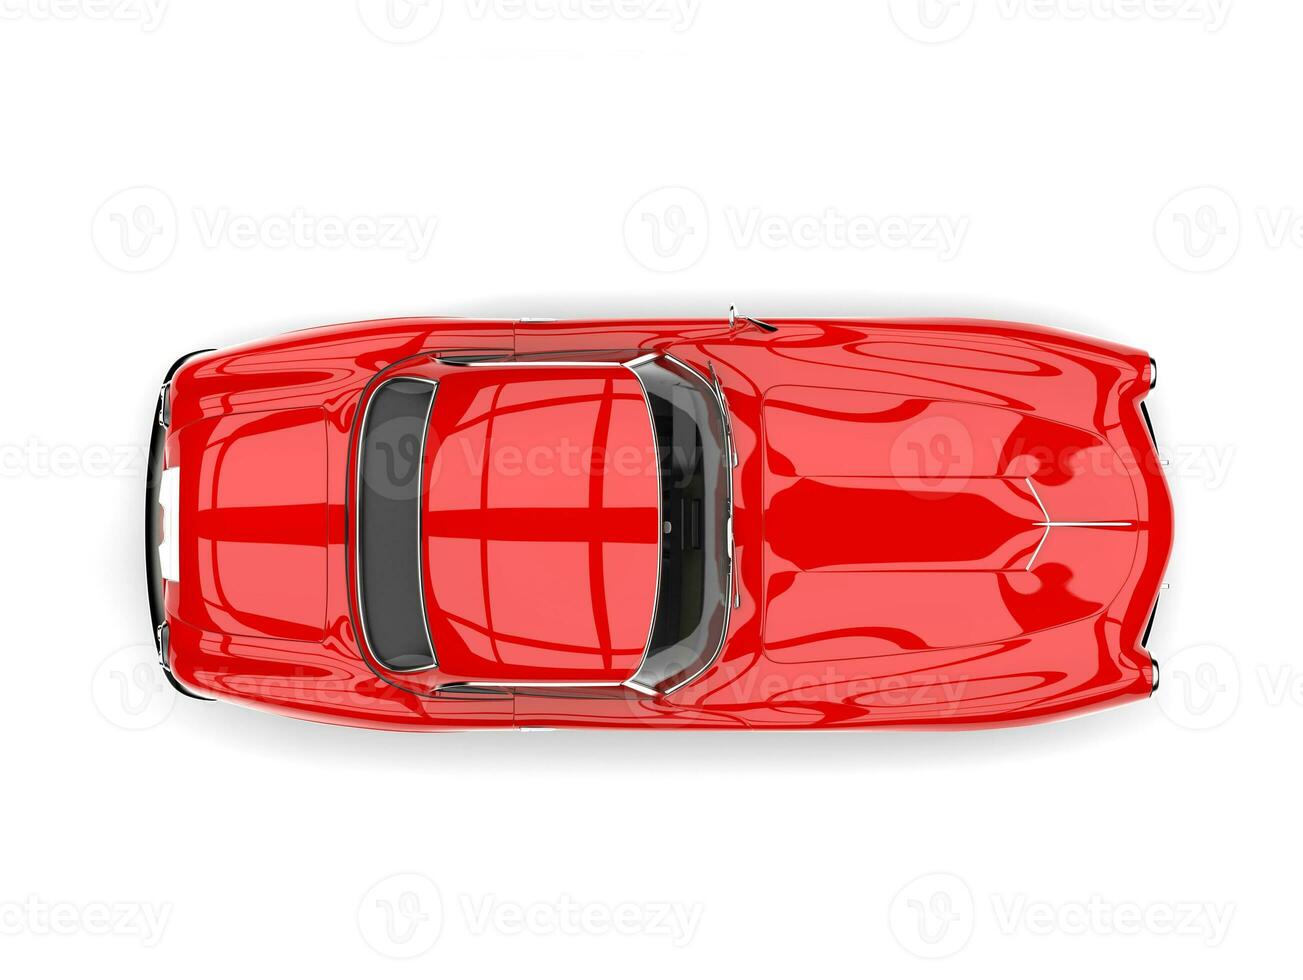 Fire red vintage sports car - top down view photo